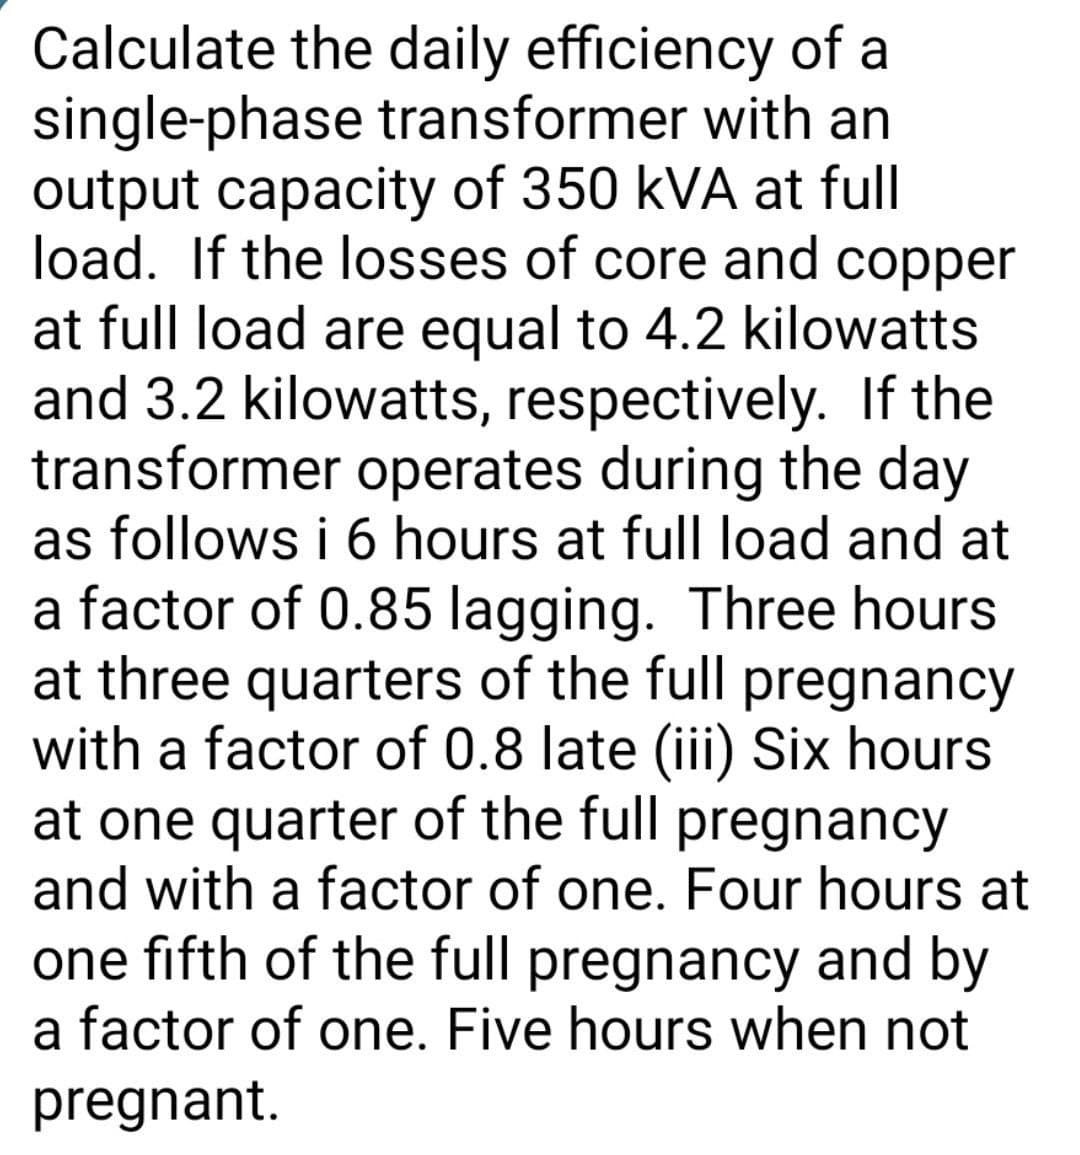 Calculate the daily efficiency of a
single-phase transformer with an
output capacity of 350 kVA at full
load. If the losses of core and copper
at full load are equal to 4.2 kilowatts
and 3.2 kilowatts, respectively. If the
transformer operates during the day
as follows i 6 hours at full load and at
a factor of 0.85 lagging. Three hours
at three quarters of the full pregnancy
with a factor of 0.8 late (iii) Six hours
at one quarter of the full pregnancy
and with a factor of one. Four hours at
one fifth of the full pregnancy and by
a factor of one. Five hours when not
pregnant.
